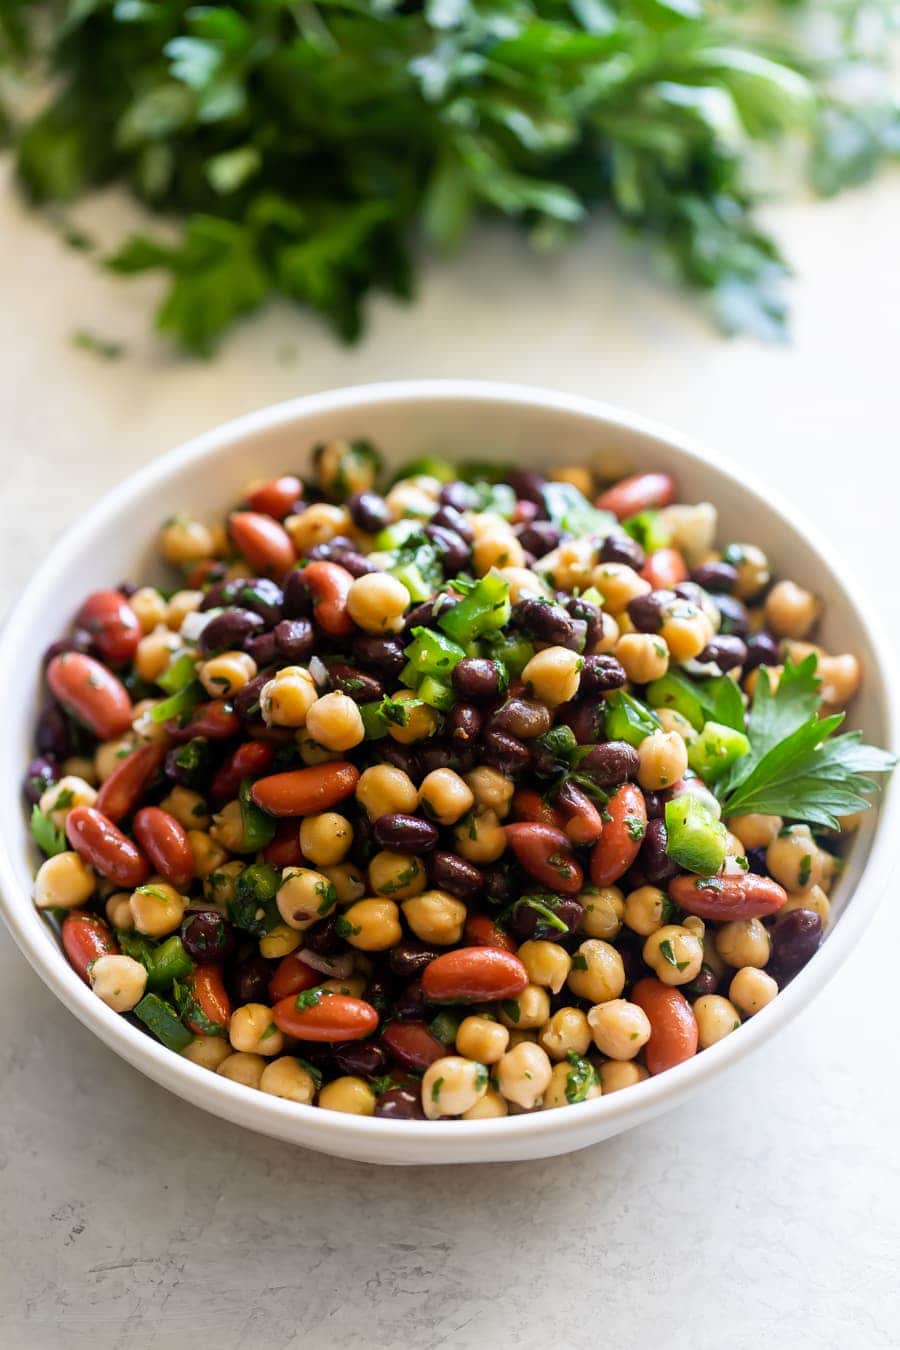 A plate with three bean salad tossed in chimichurri sauce